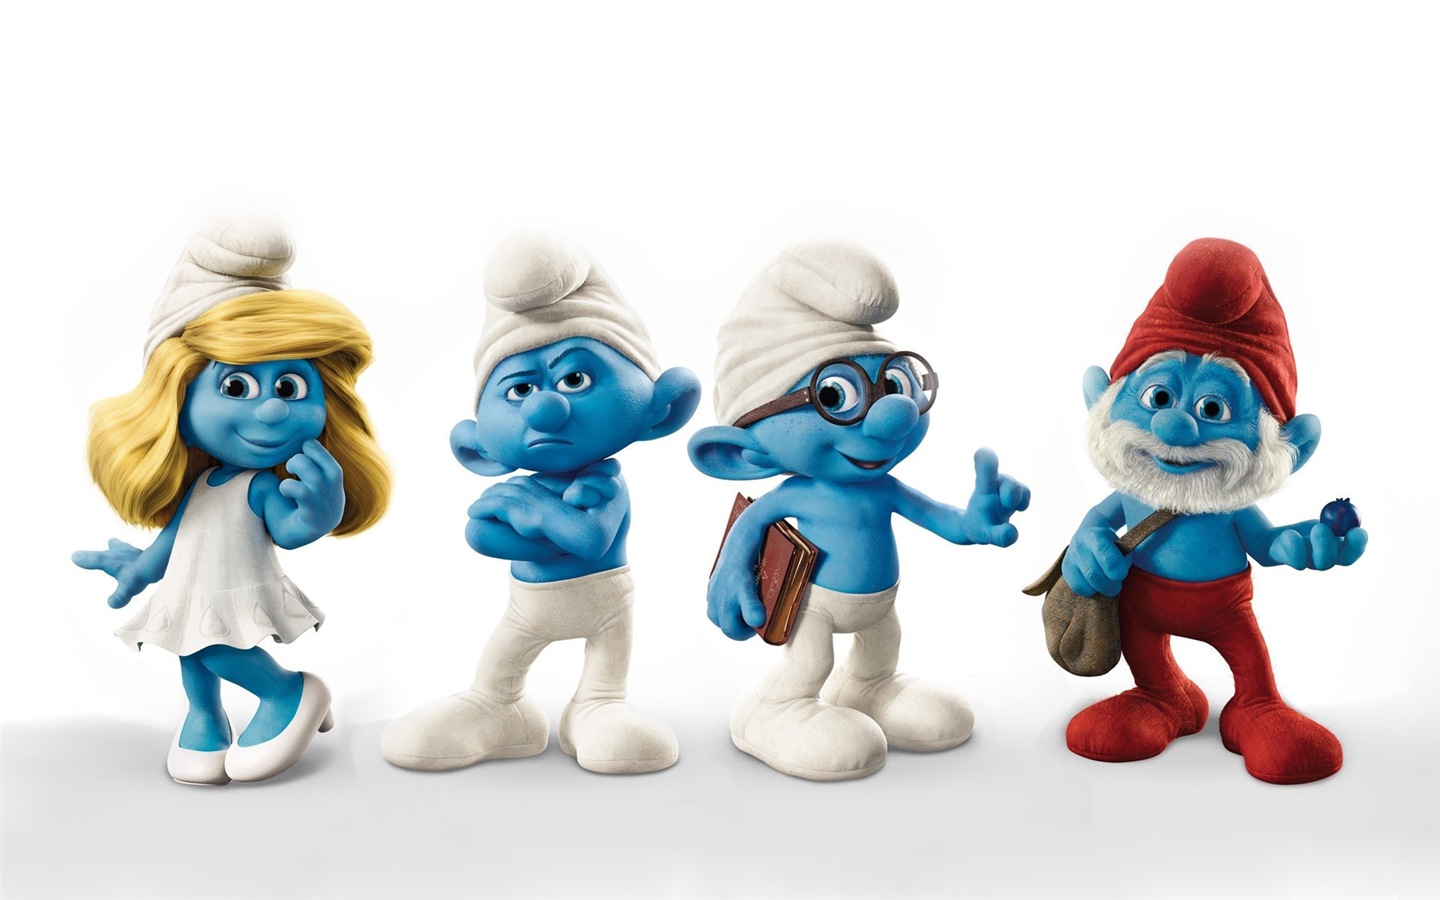 The Smurfs 2 HD movie wallpapers #3 - 1440x900